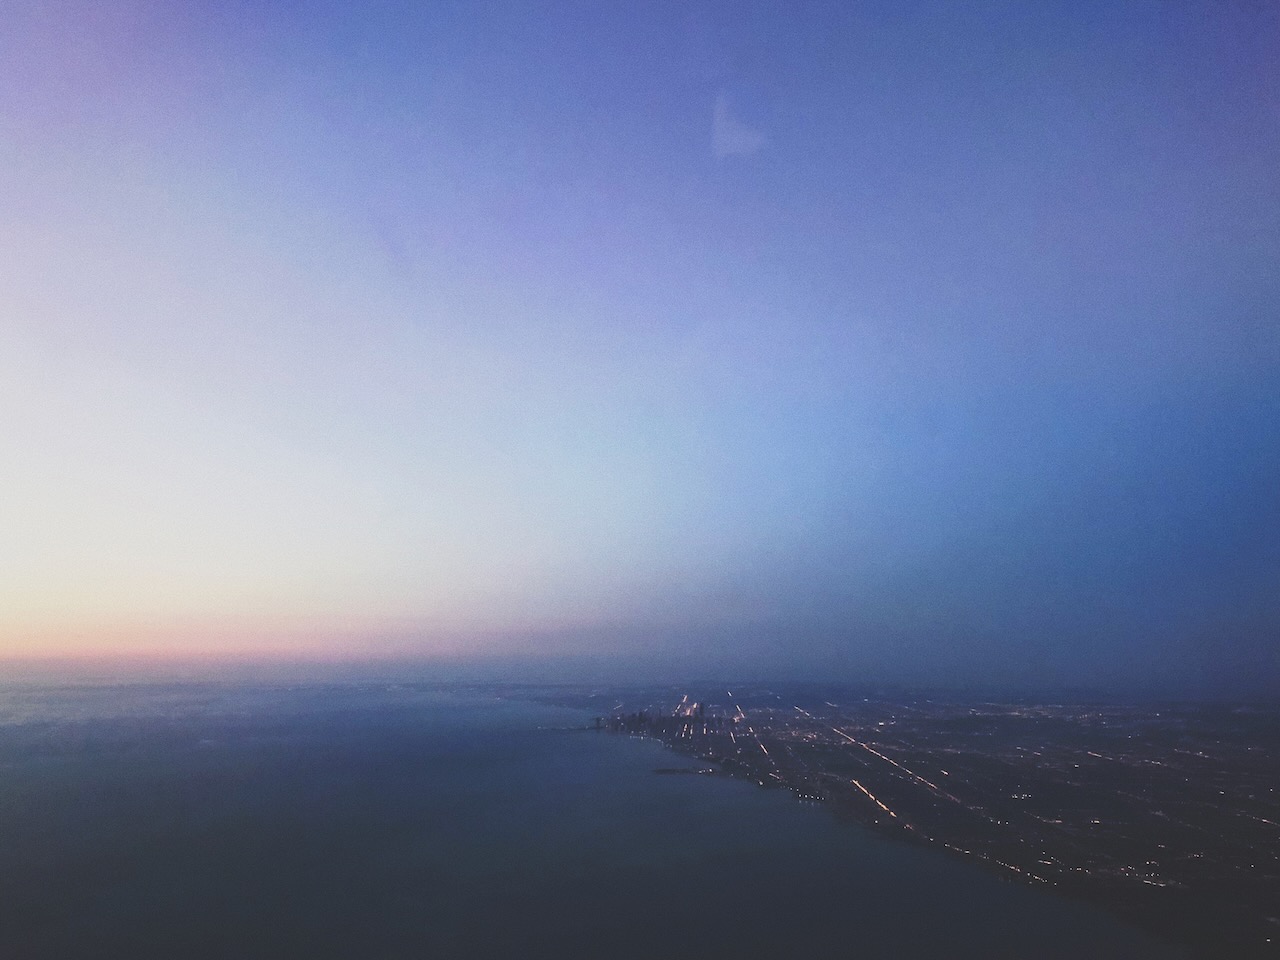 Chicago sunrise approach, photo 2 of 3